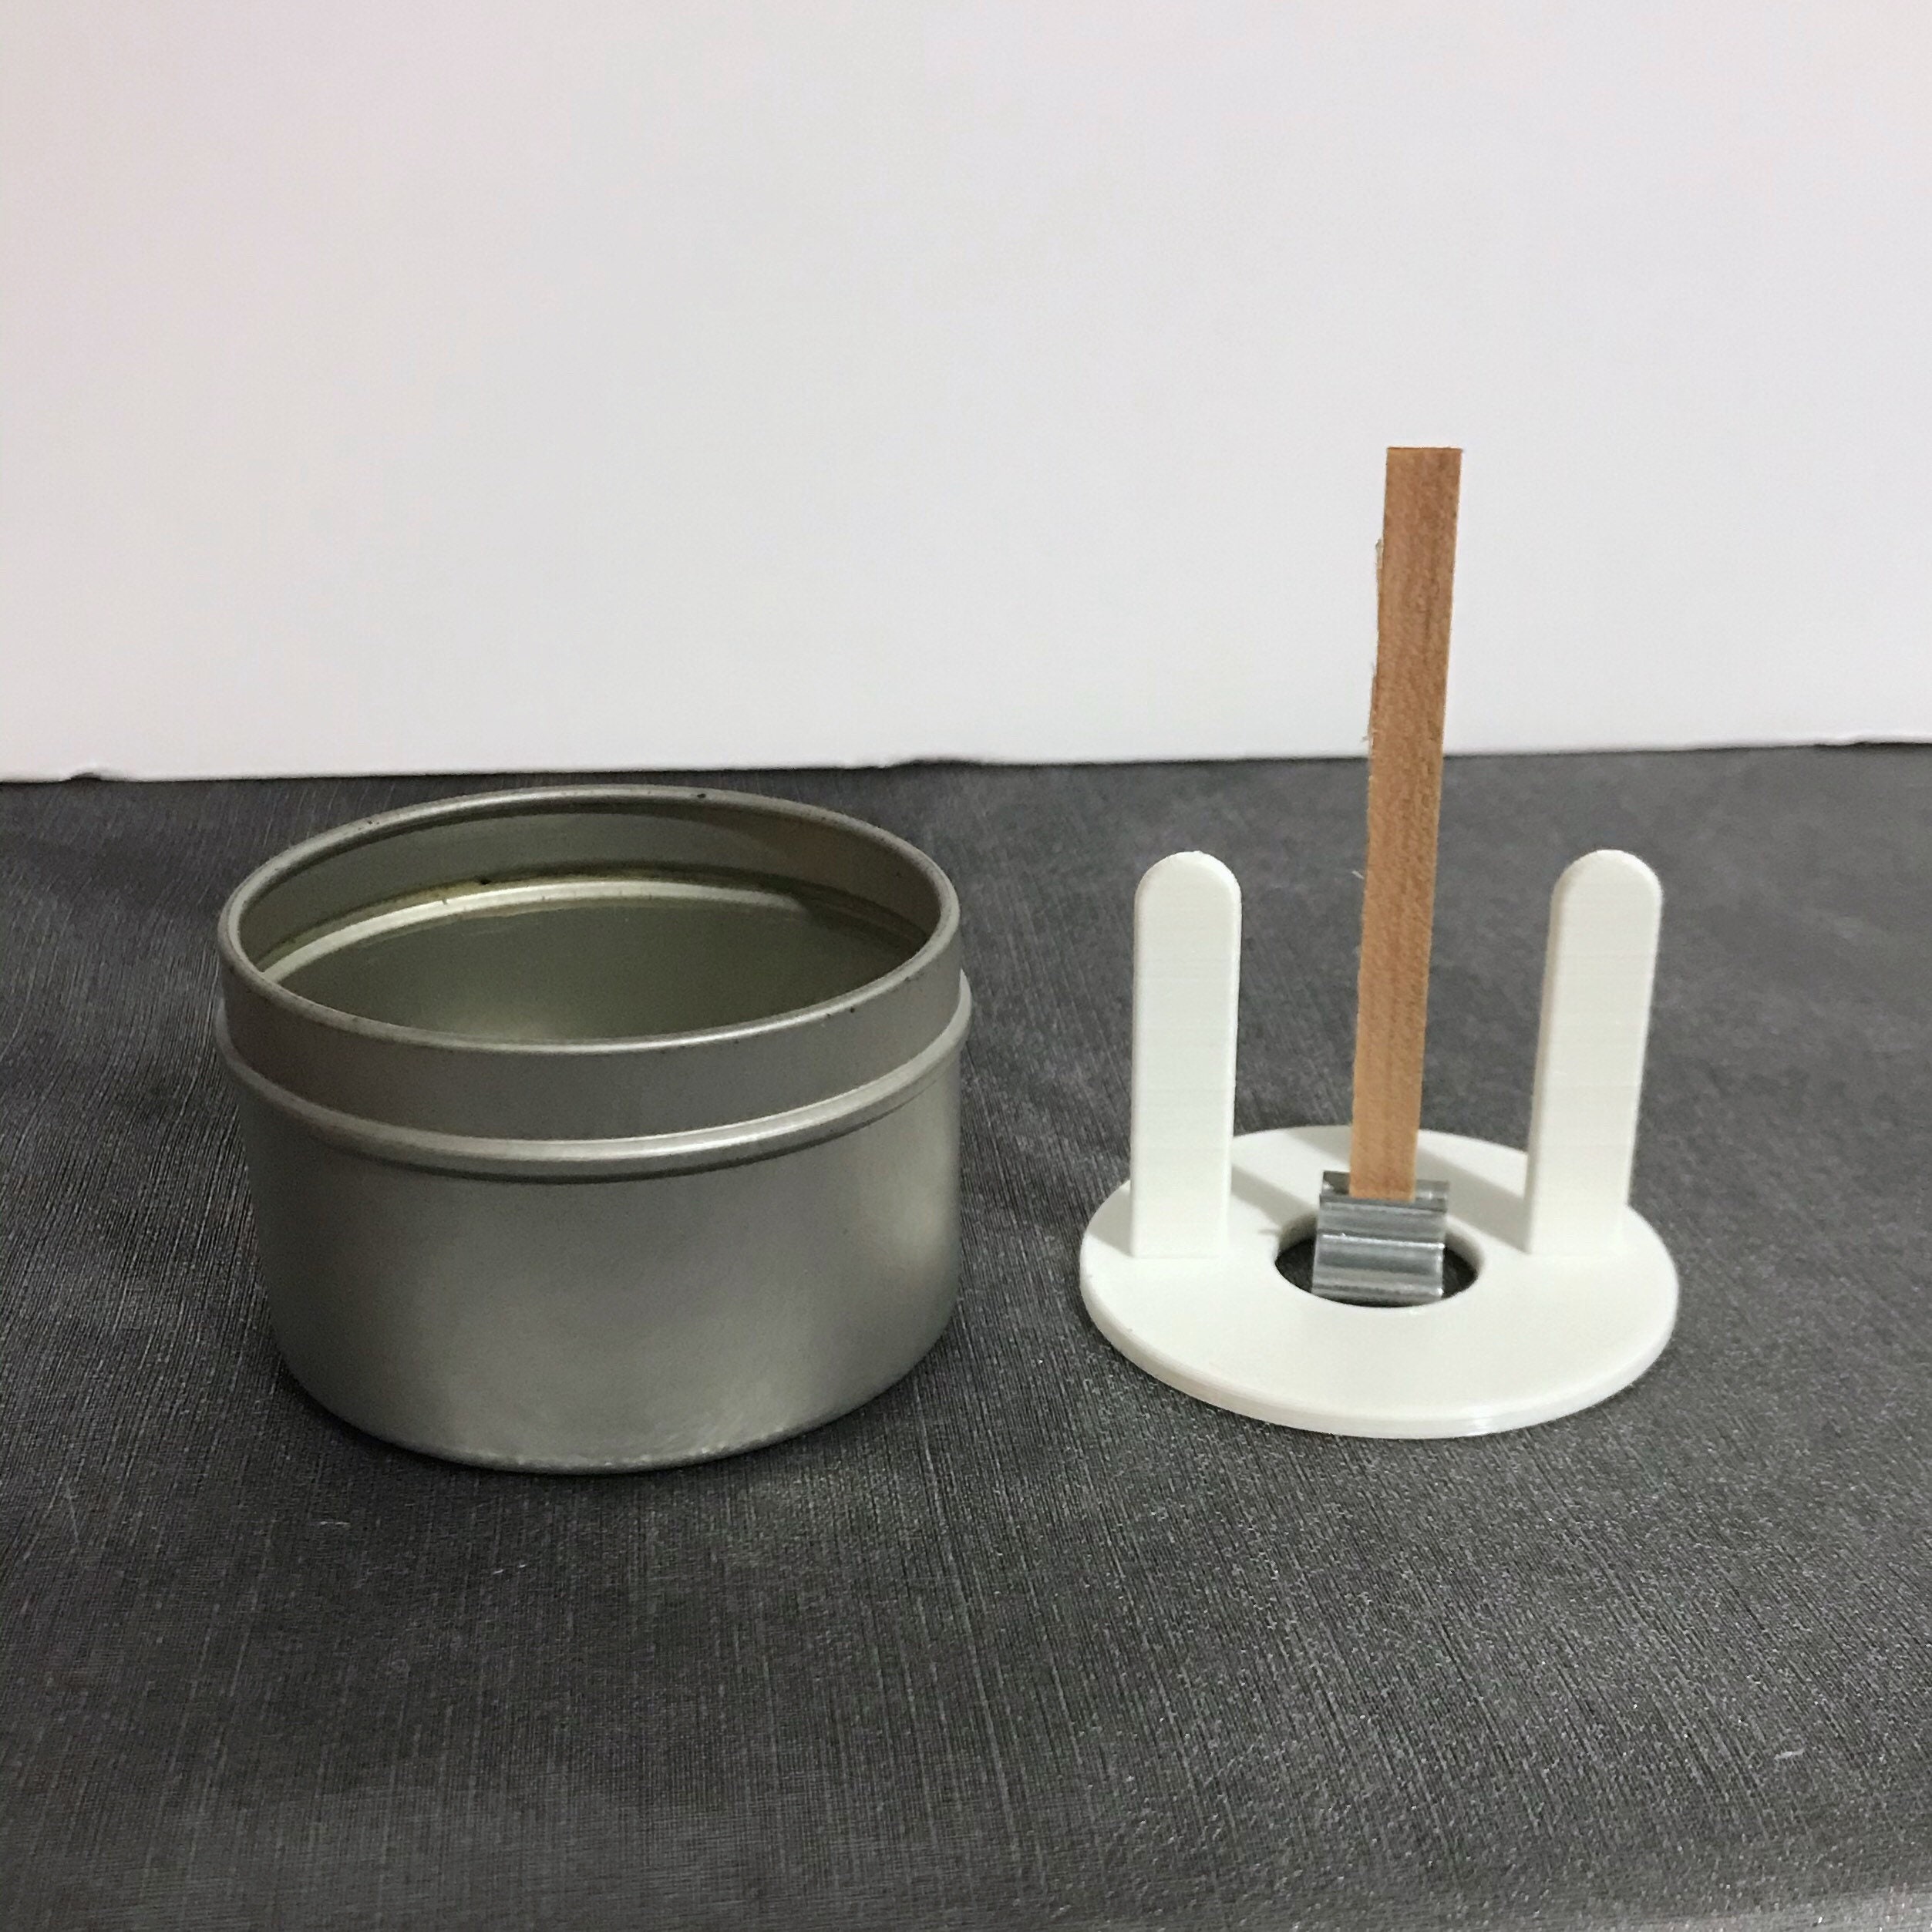 Wick Holder for 3 Wicks. Triple Wick Holder for Candle Making. 